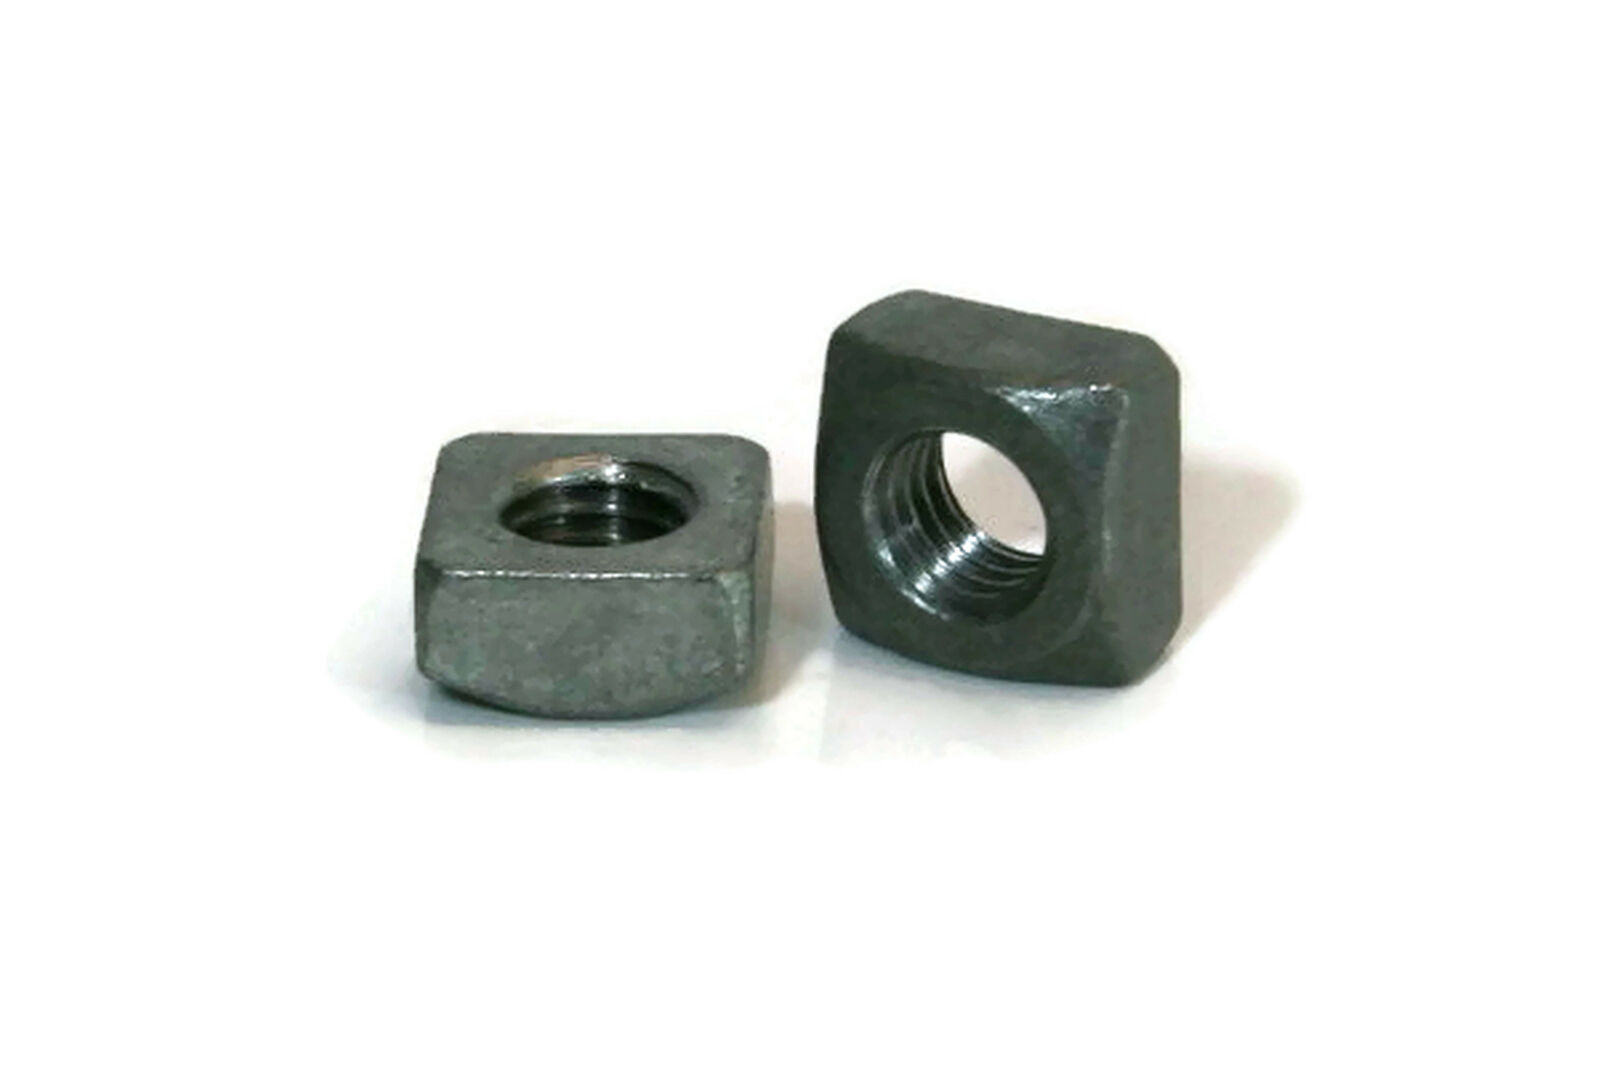 Hot Dip Galvanized Steel Square Nuts - Four-sided Nuts - Coarse - Select Size